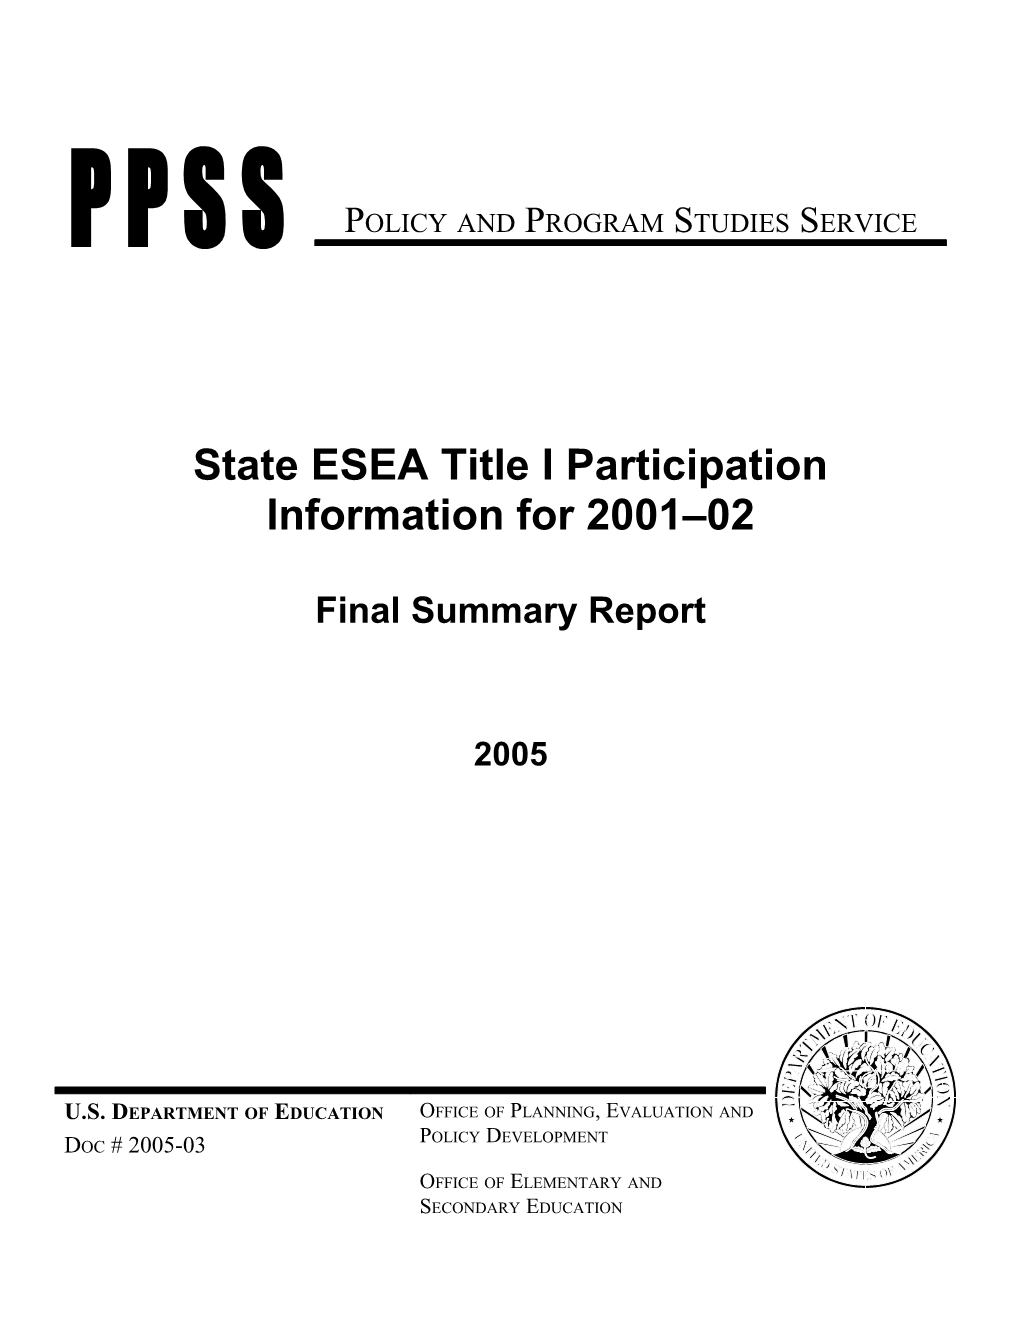 State ESEA Title I Participation Information for 2001-02 (Msword)